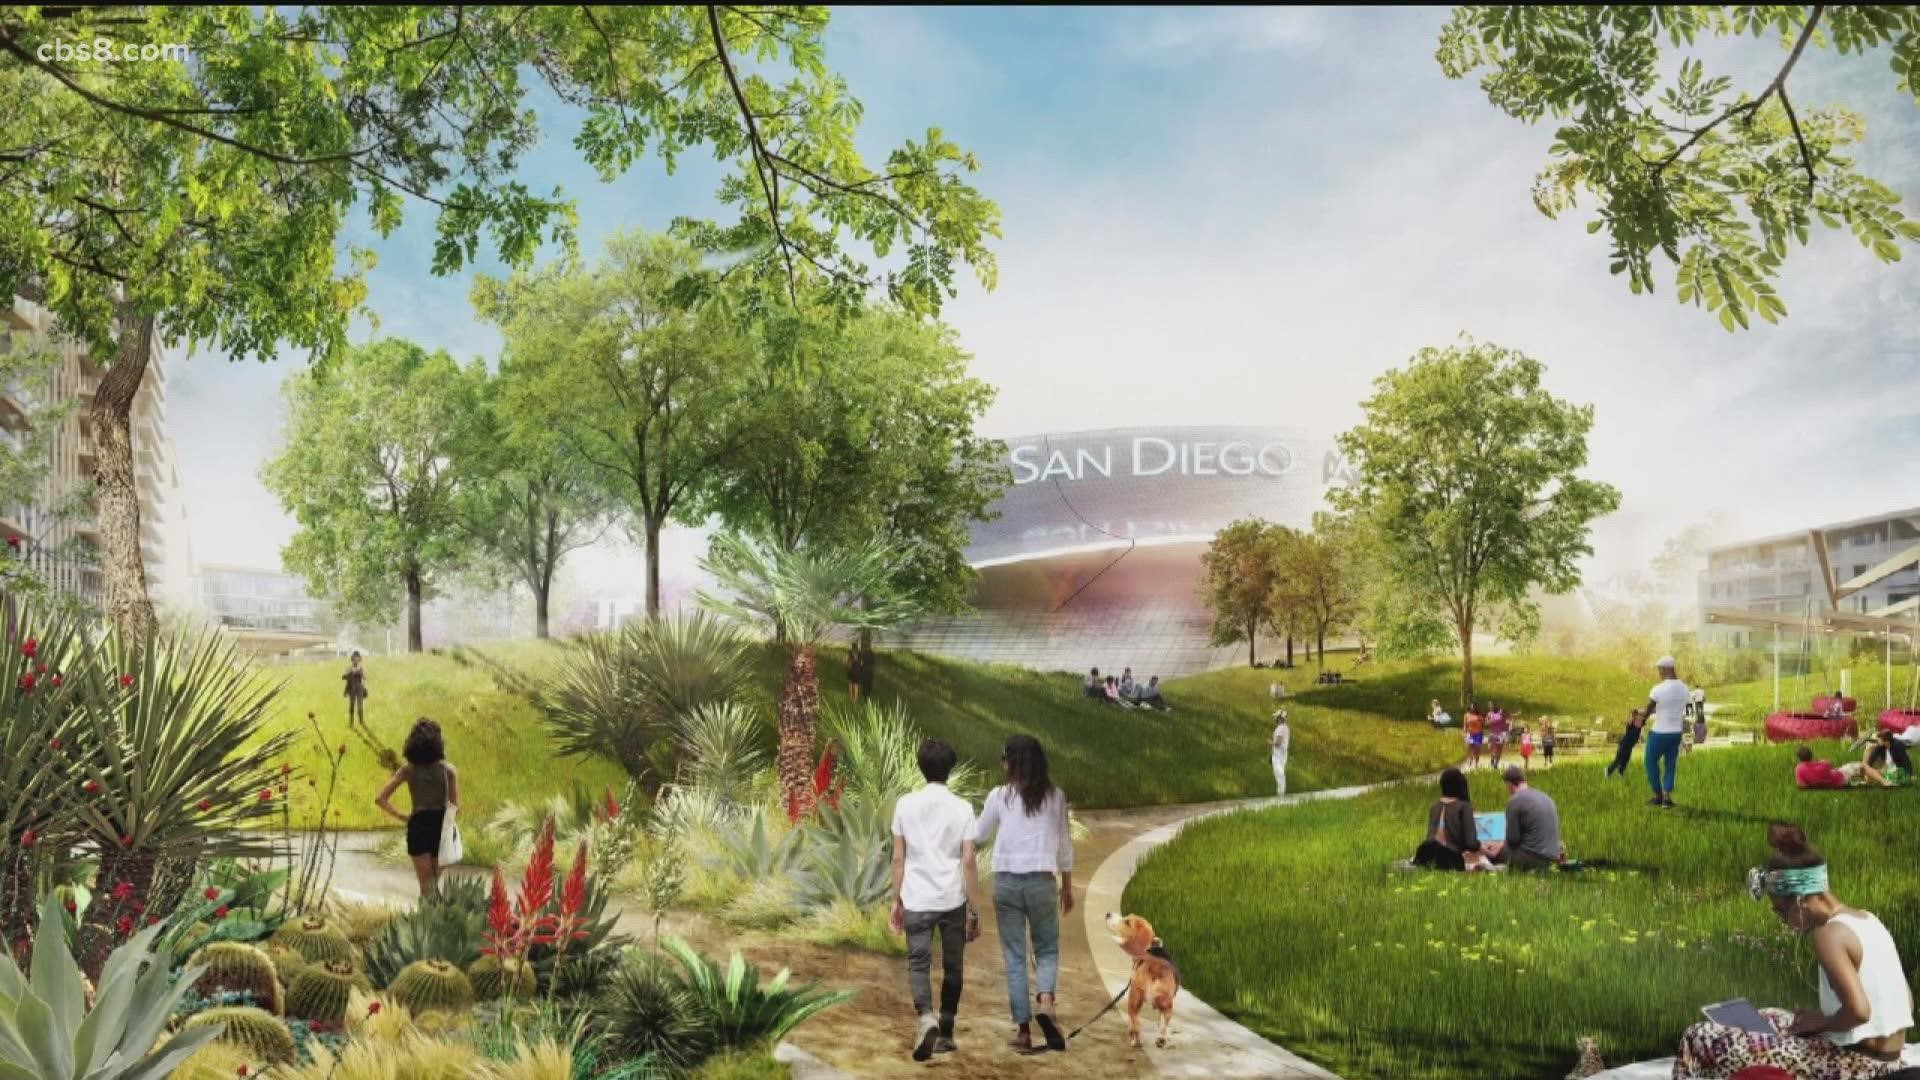 Five companies have submitted their bid to the City of San Diego for how they would redesign the 48-acre property.